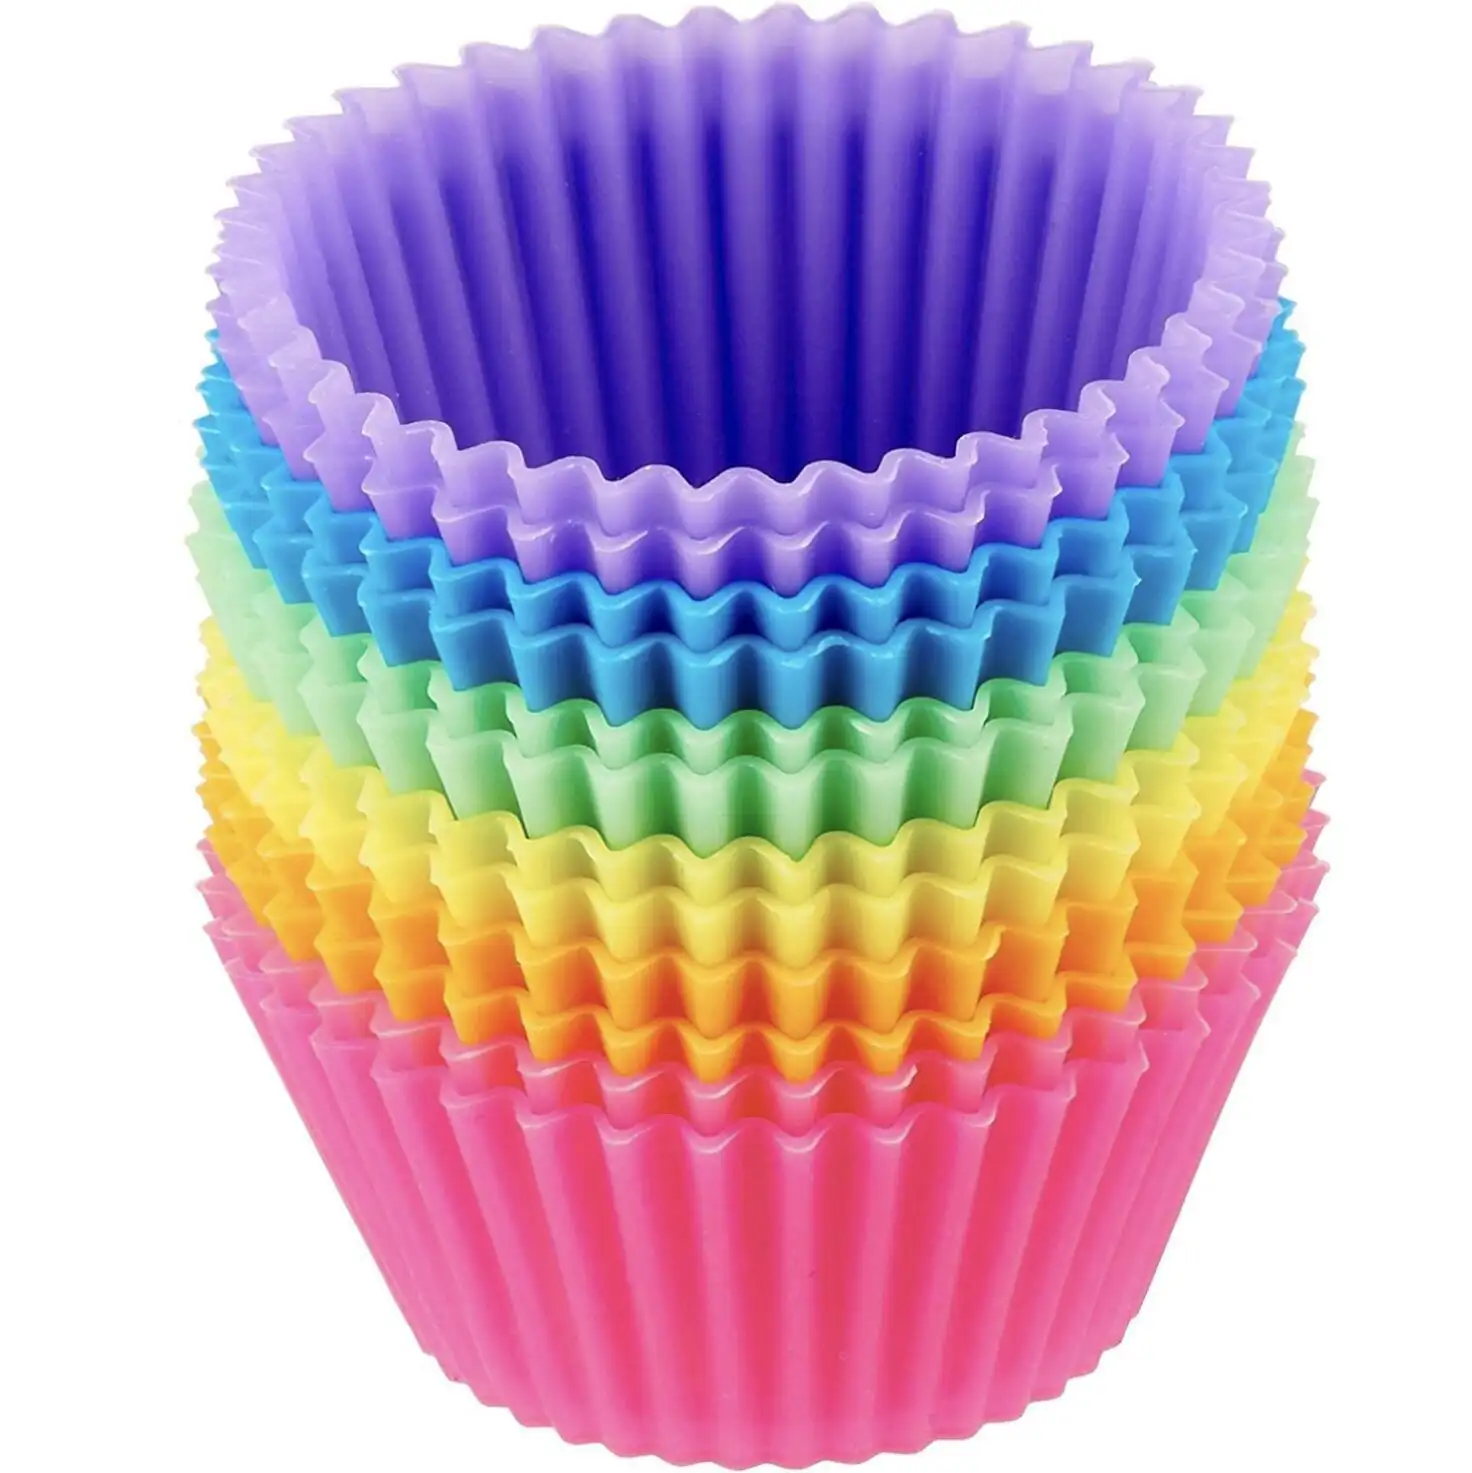 Silicone Baking Cups Reusable Muffin Liners Non-Stick Cup Cake Molds Set Cupcake Silicone Liner Standard Size Silicone Cupcake